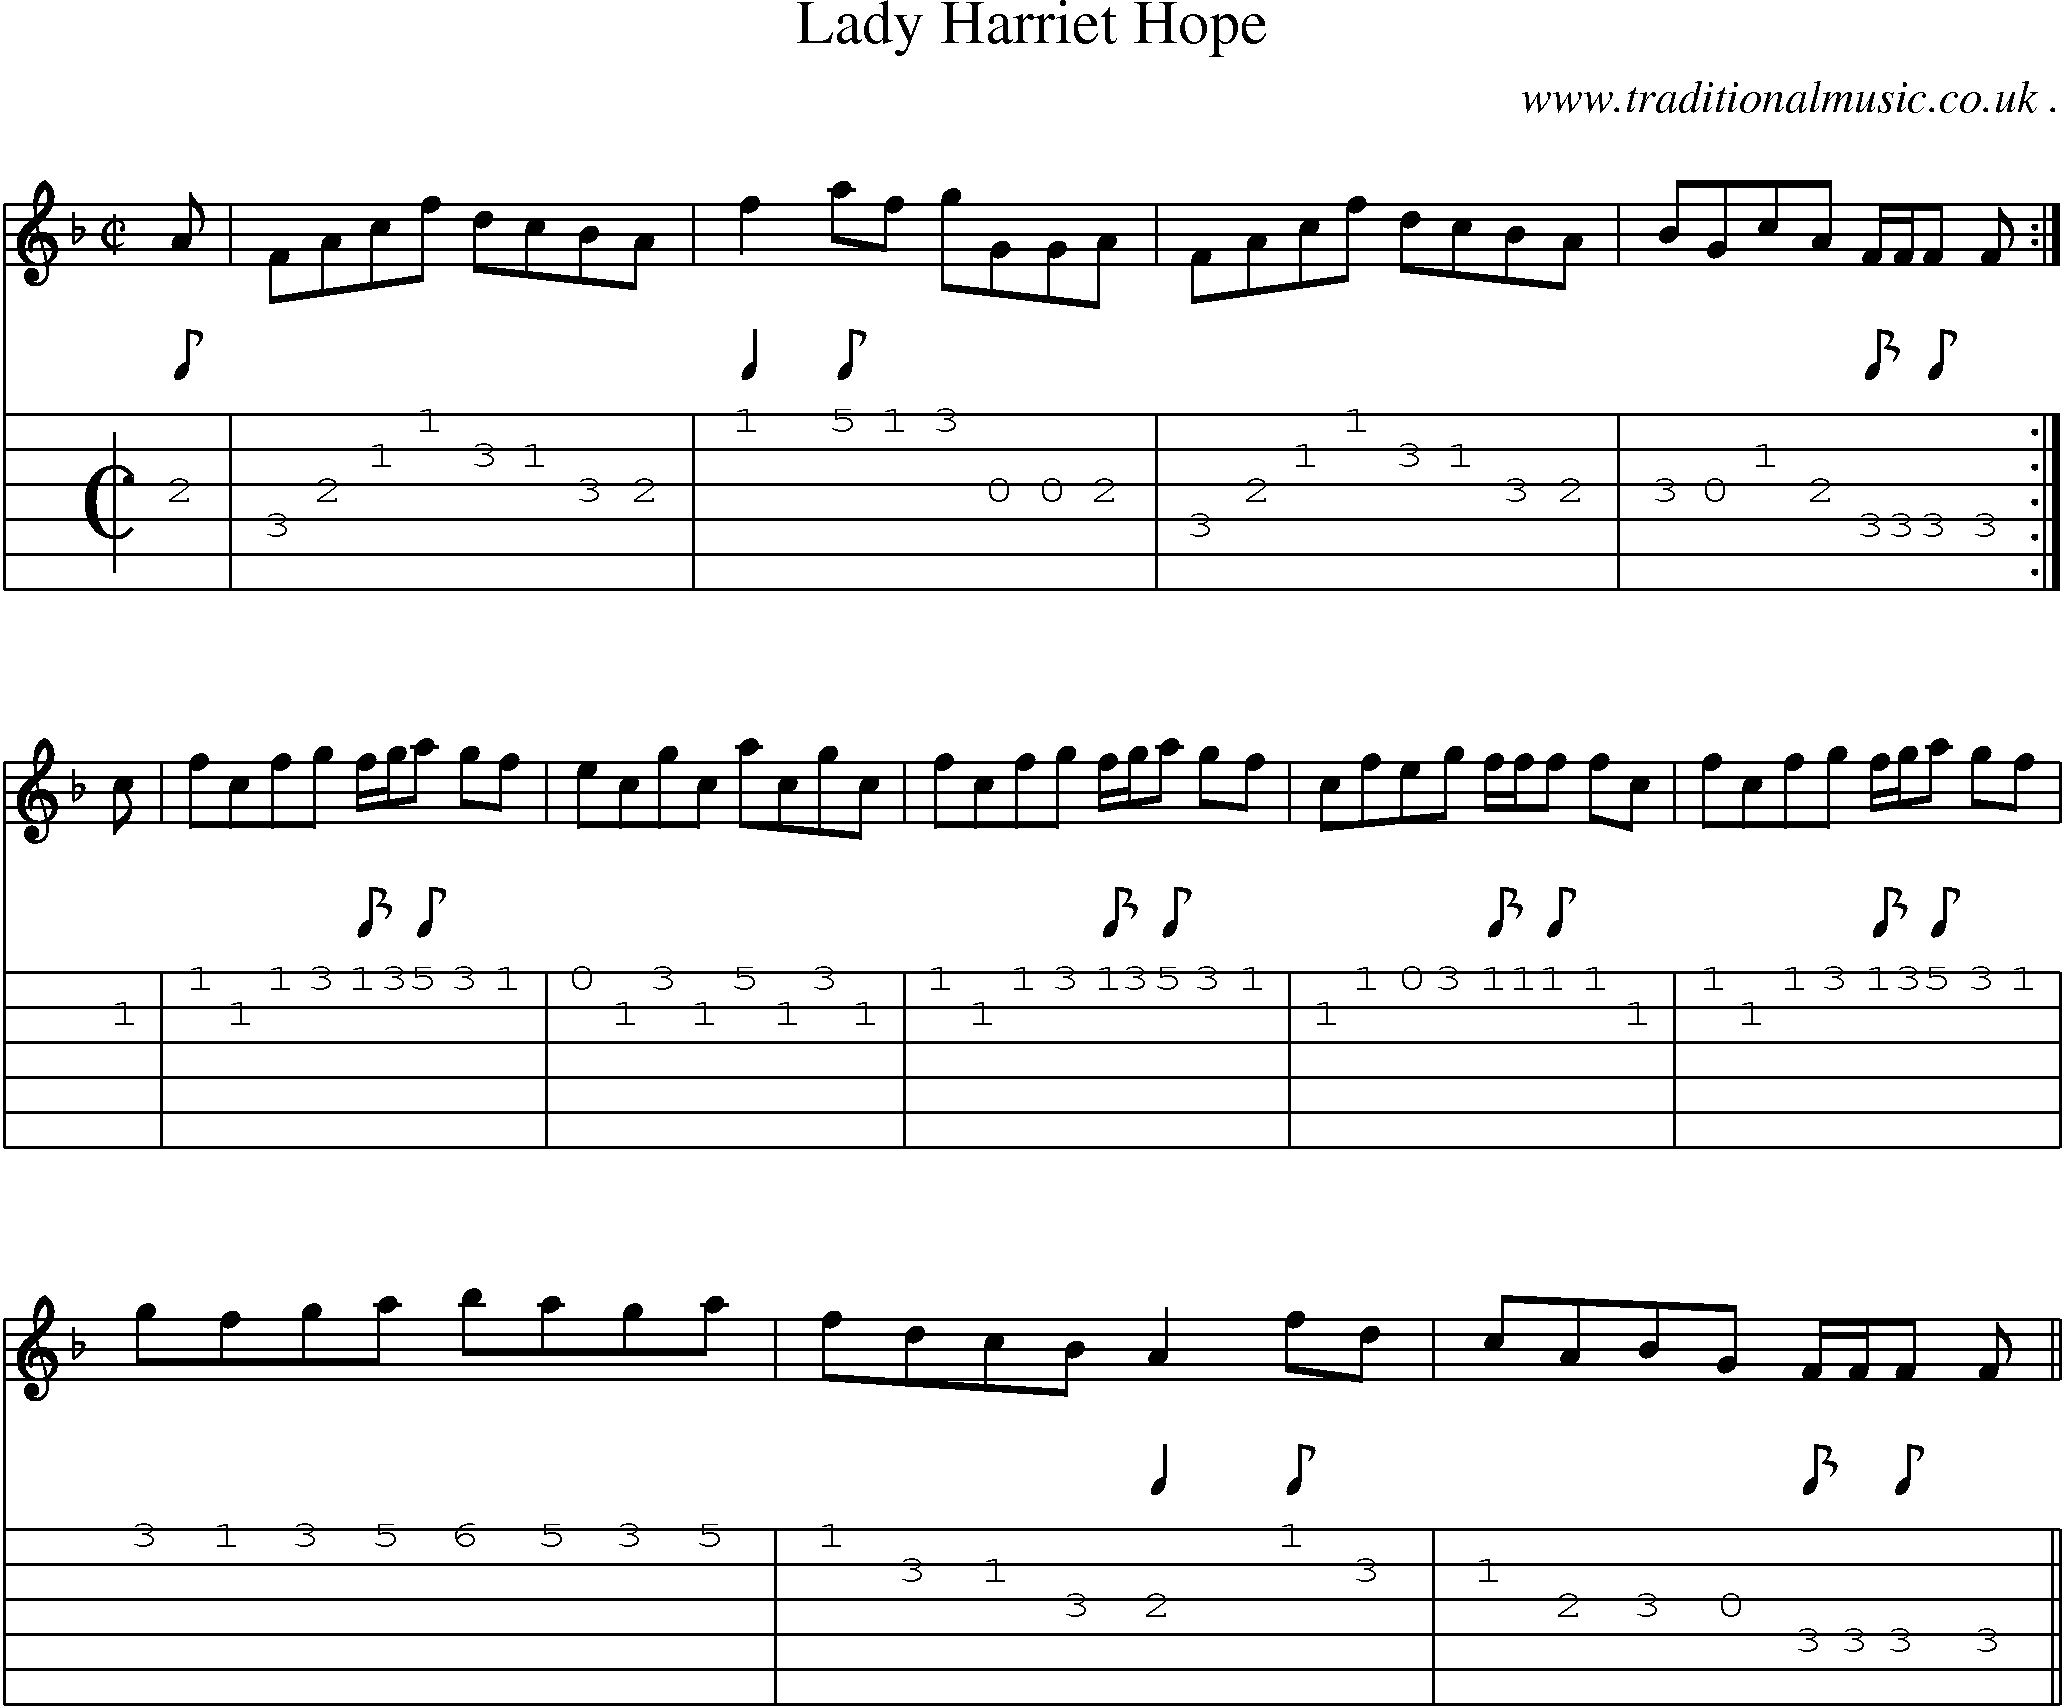 Sheet-music  score, Chords and Guitar Tabs for Lady Harriet Hope